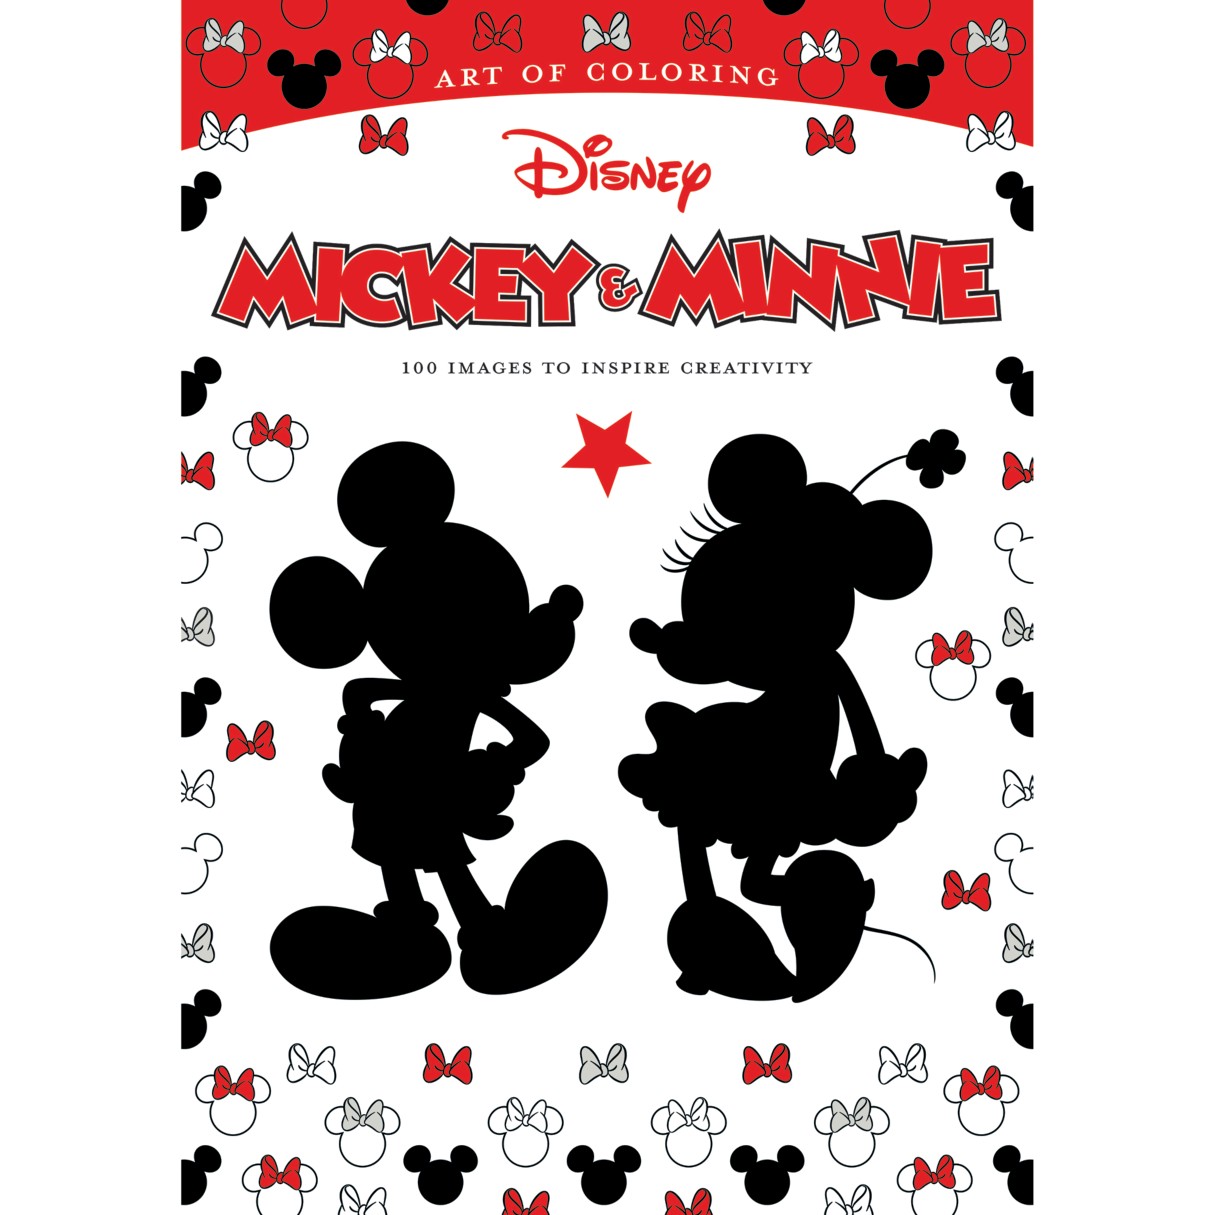 Mickey & Minnie Art of Coloring Book